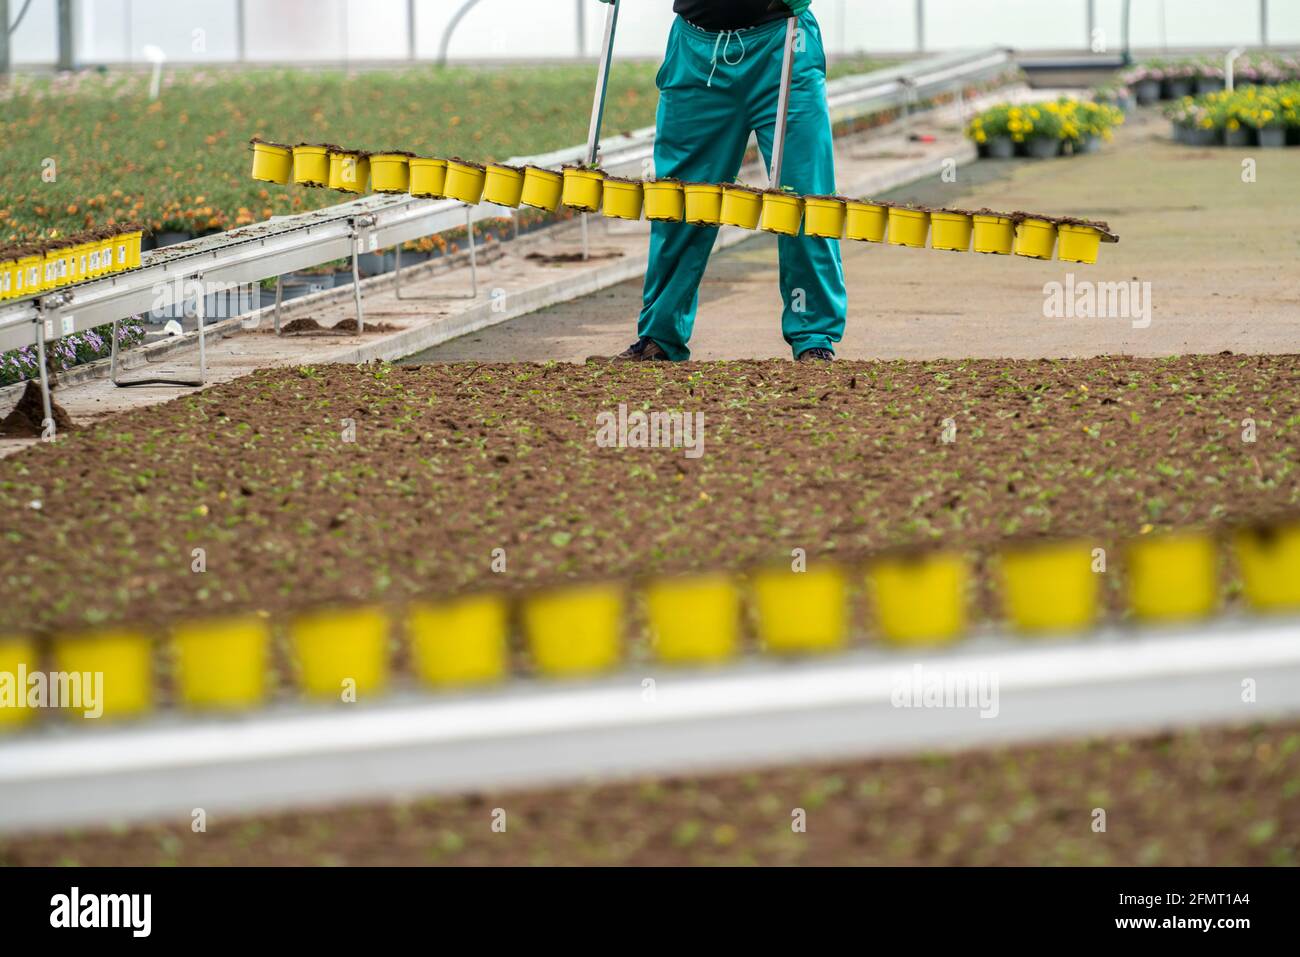 Horticulture business, greenhouse, freshly potted young plants are placed on beds to grow up there, Straelen, NRW, Germany, Stock Photo